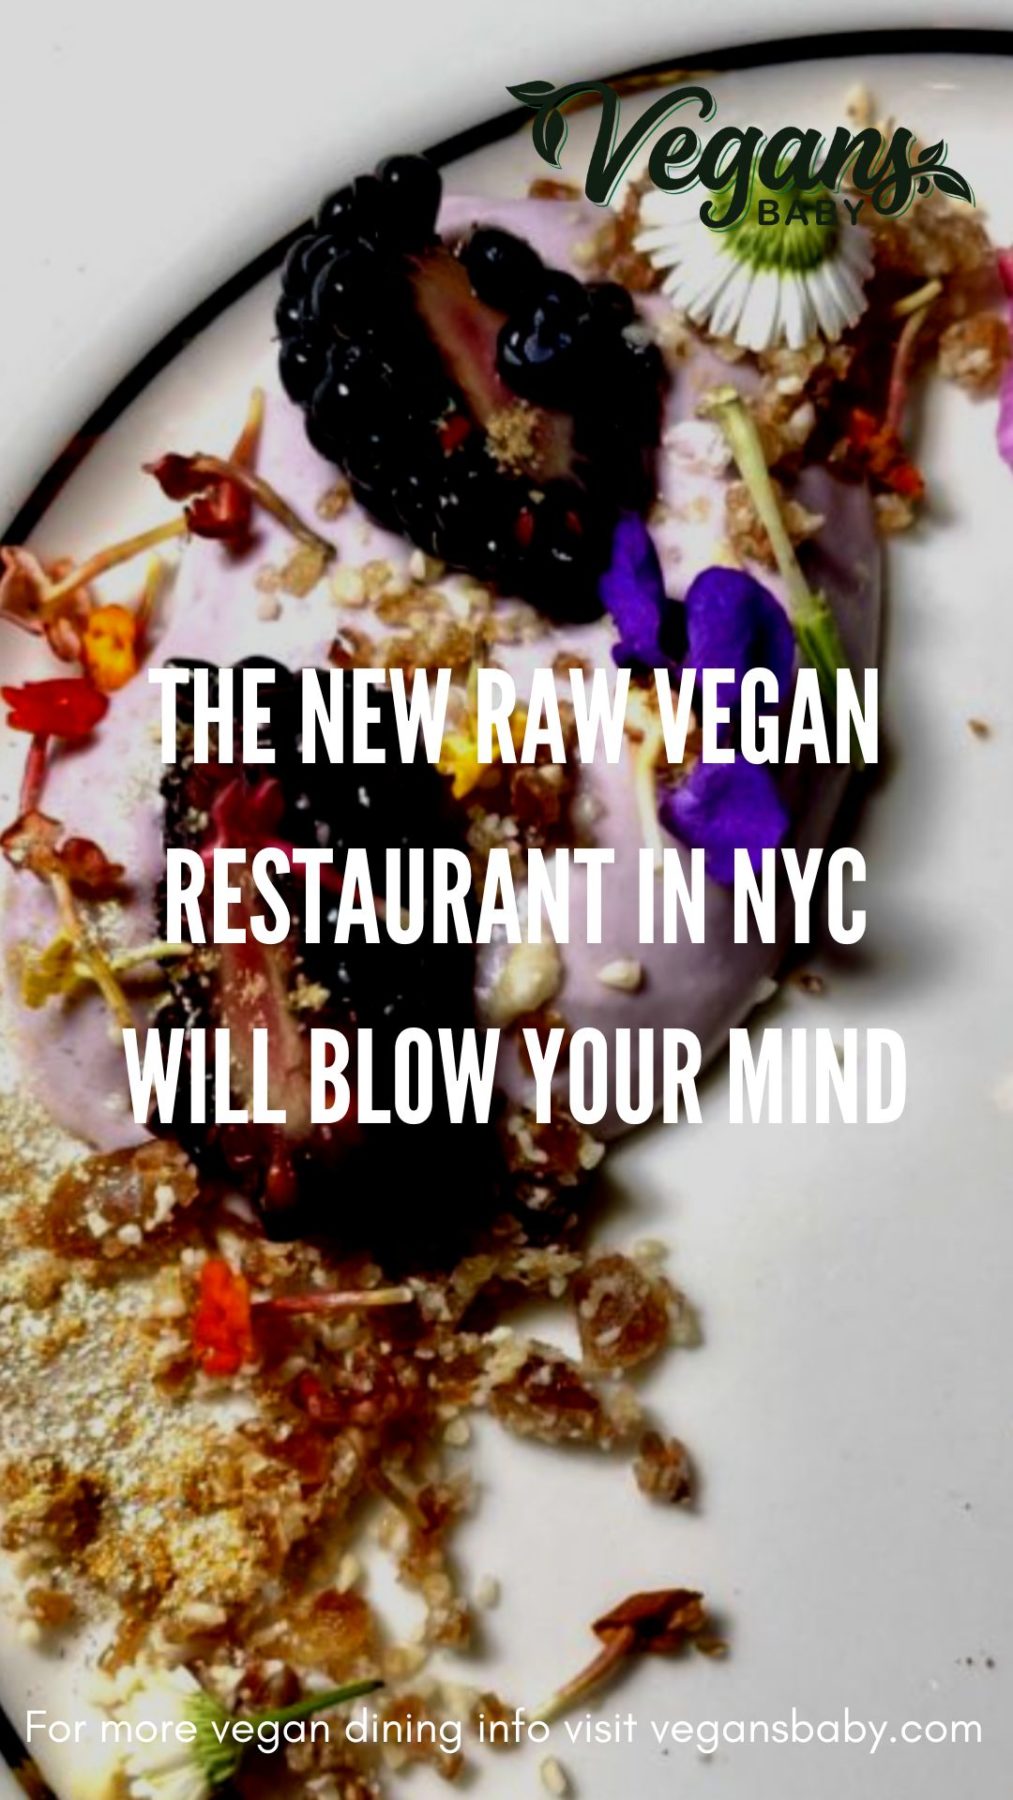 New vegan restaurants NYC -Rabbit is a raw vegan restaurant in NYC and a one of the healthy vegan restaurants in NYC. For more vegan eats NYC visit vegansbaby.com